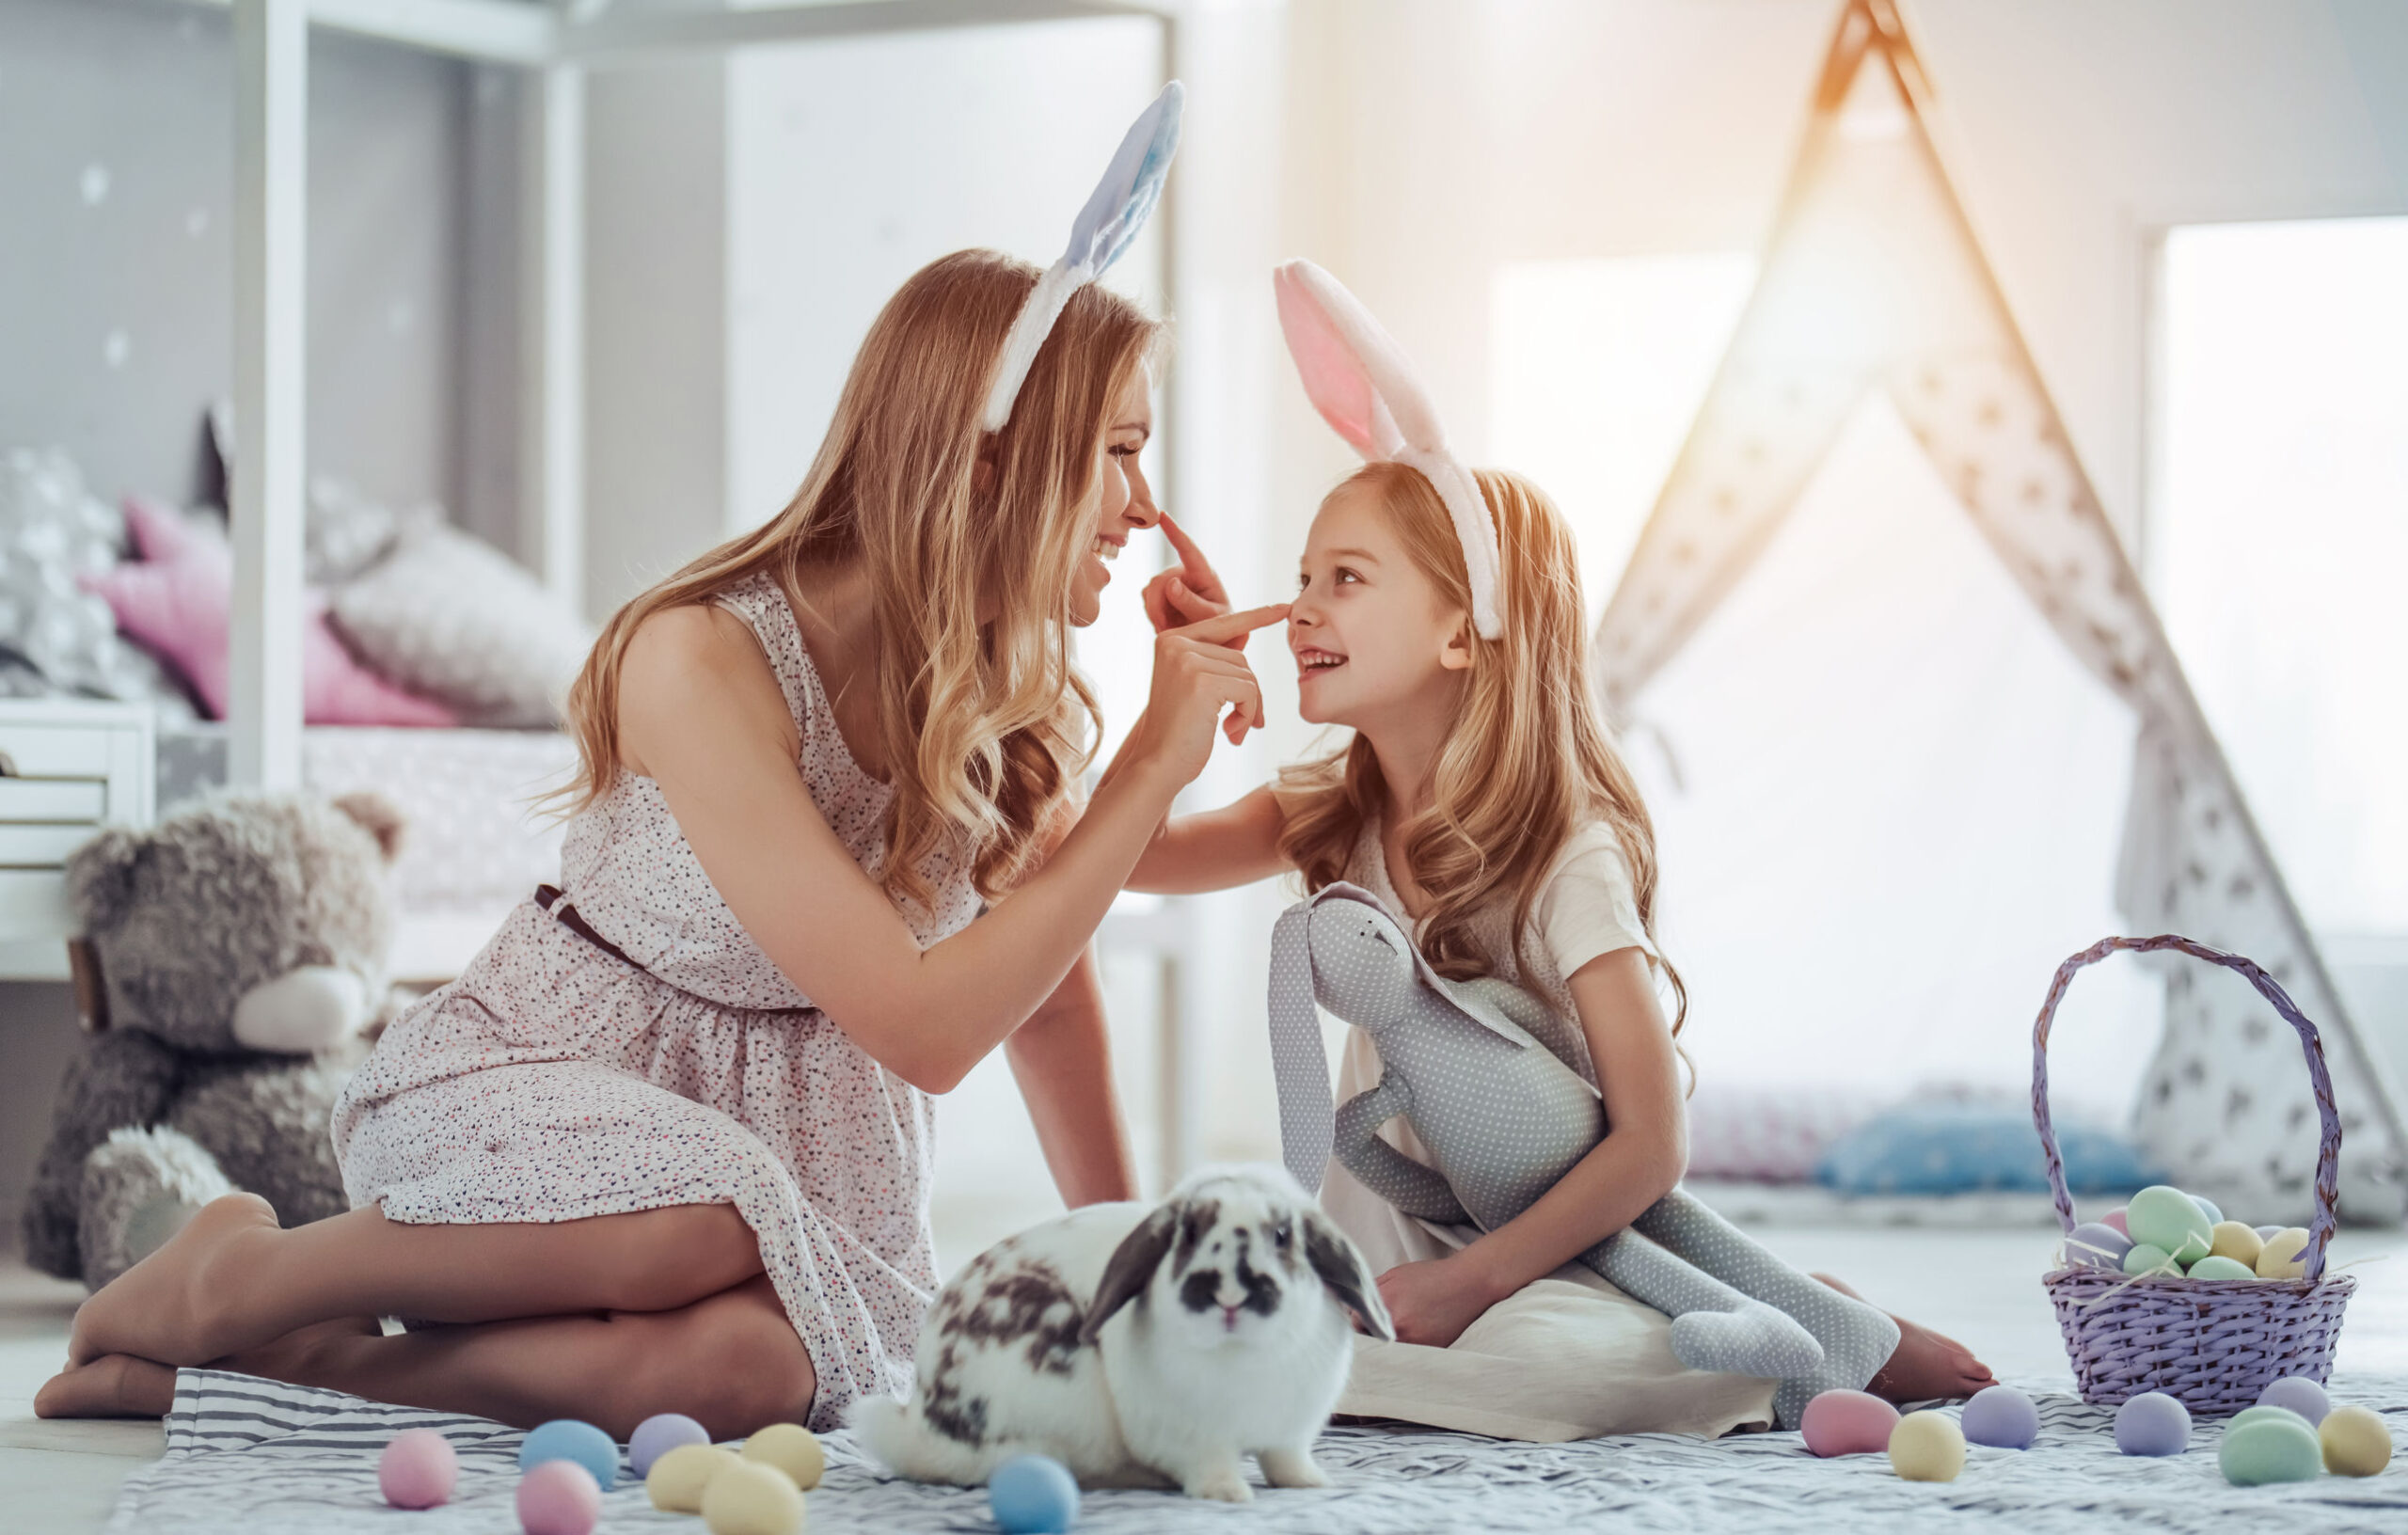 You are currently viewing 5 Egg-cellent Easter Marketing Campaign Ideas for 2021